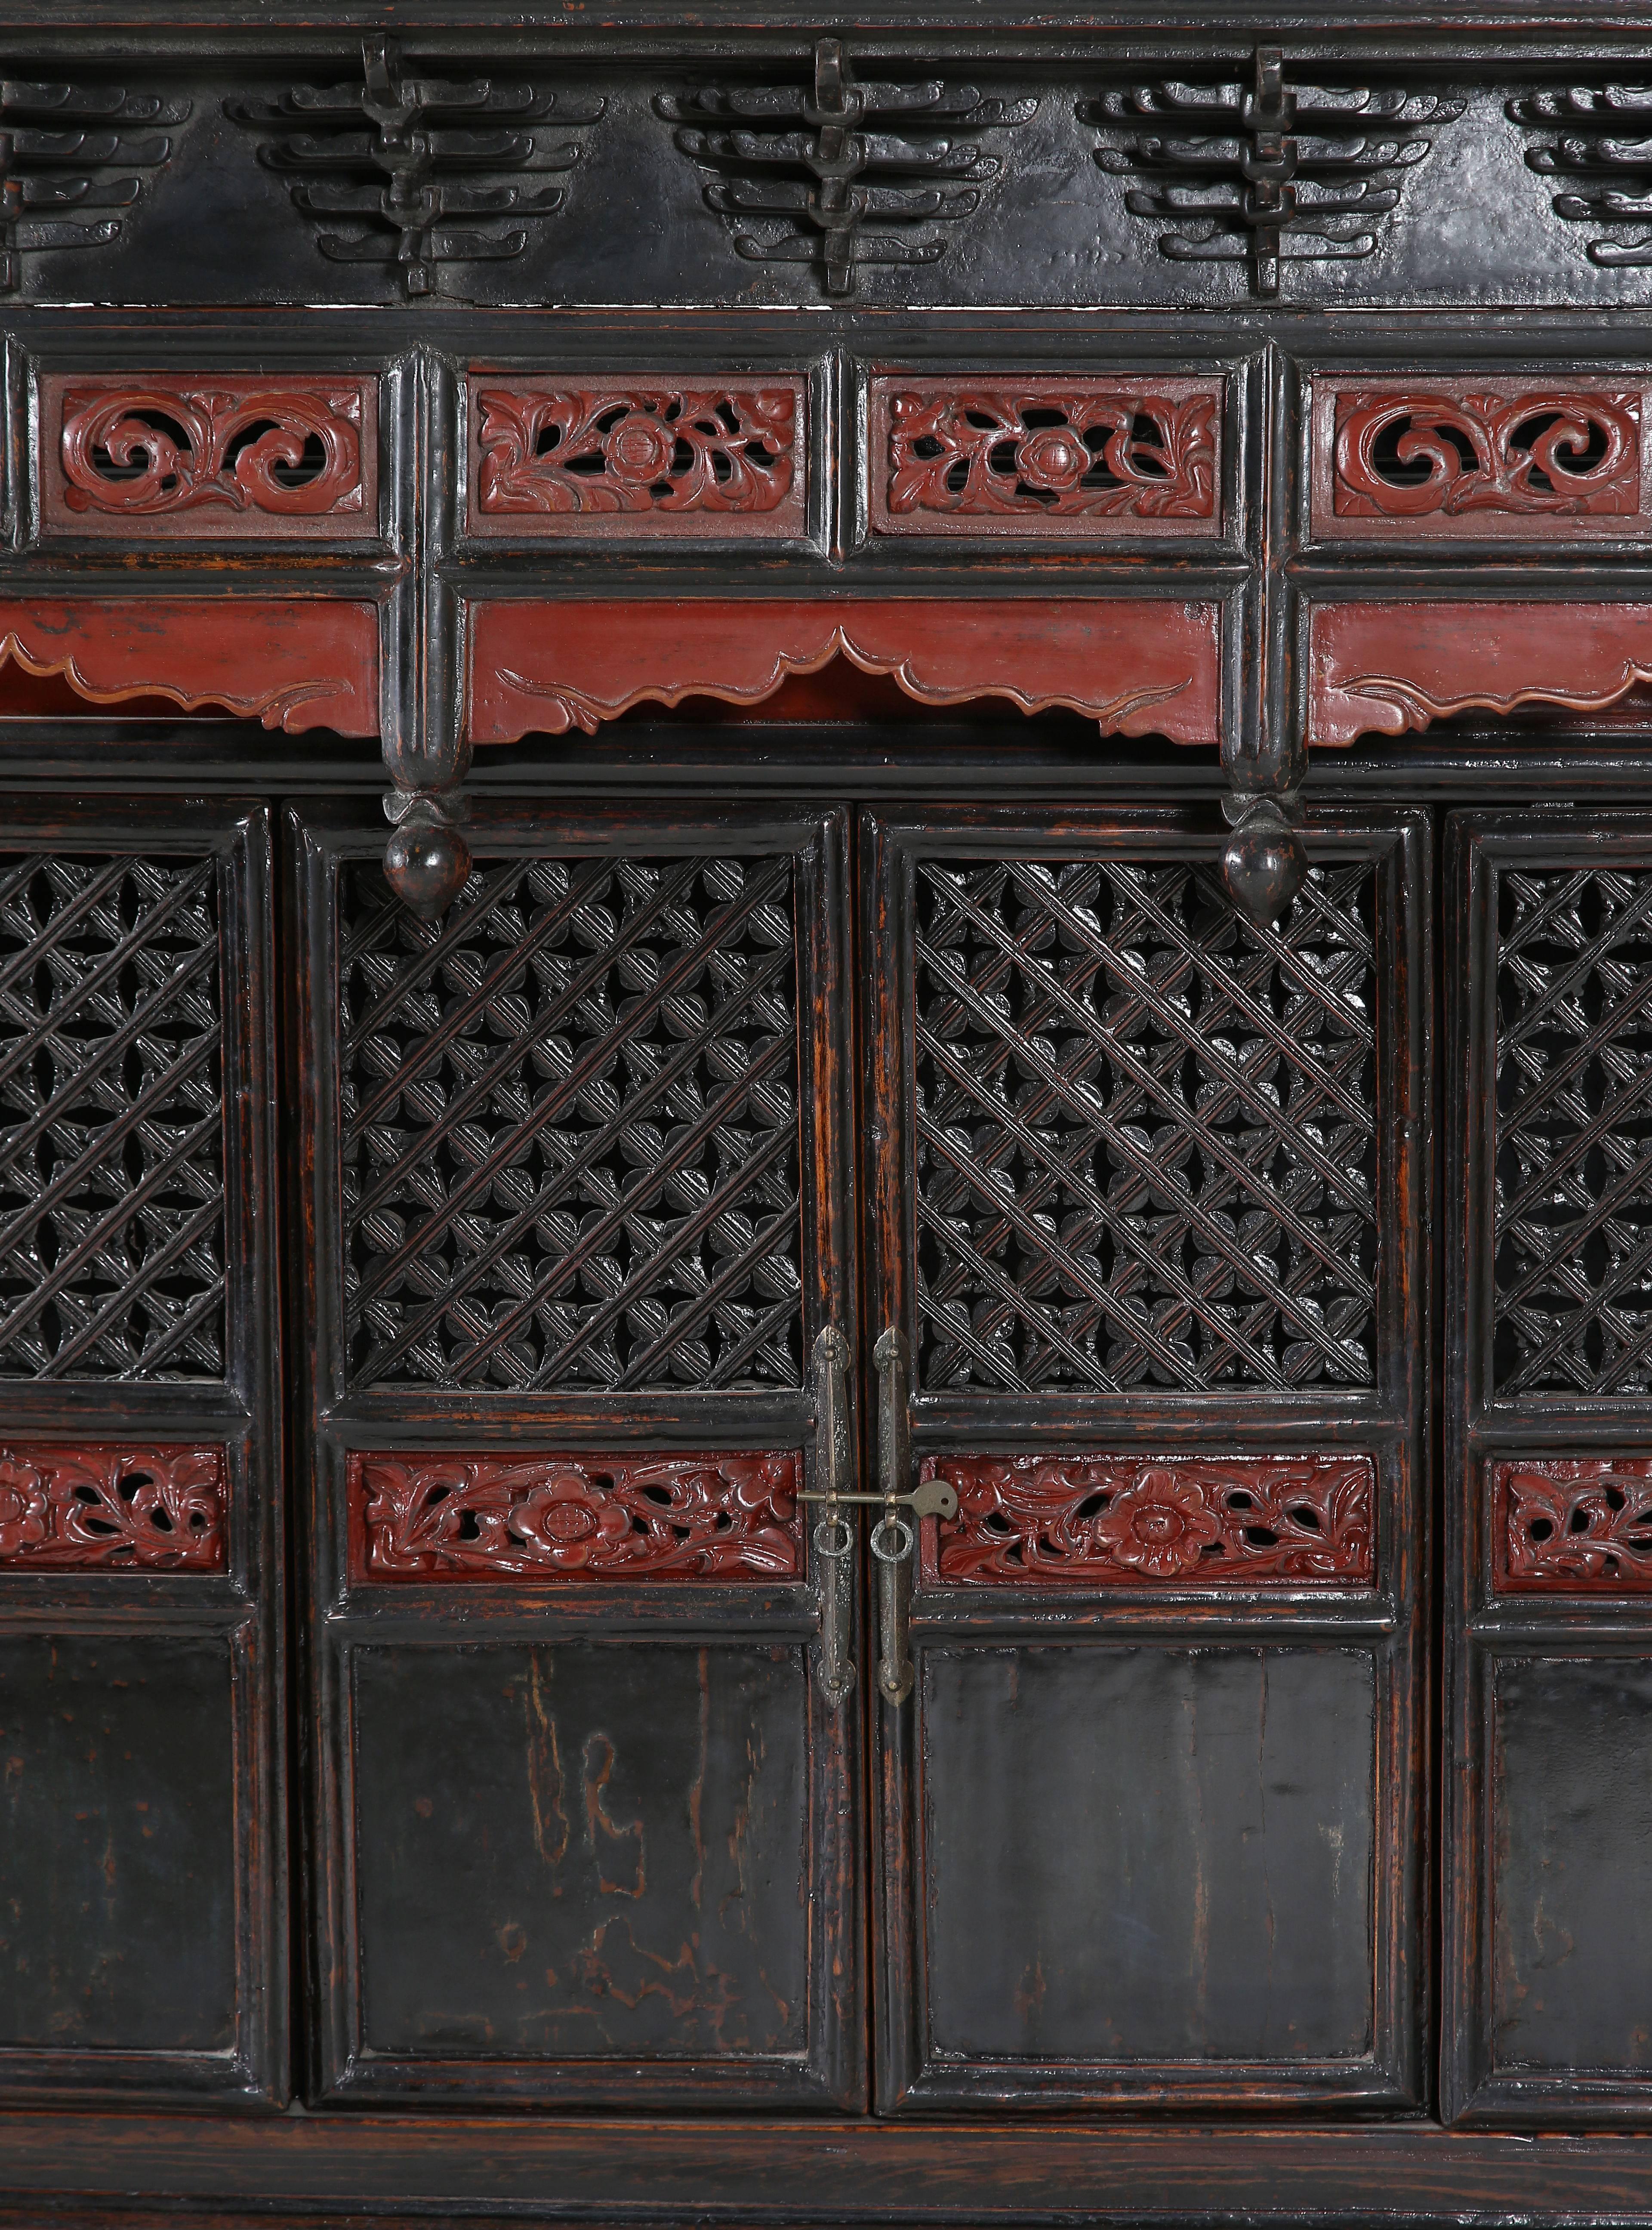 Qing Antique Black/Red Lacquer Table Shrine Cabinet Carved Lattice Doors Chinoiserie